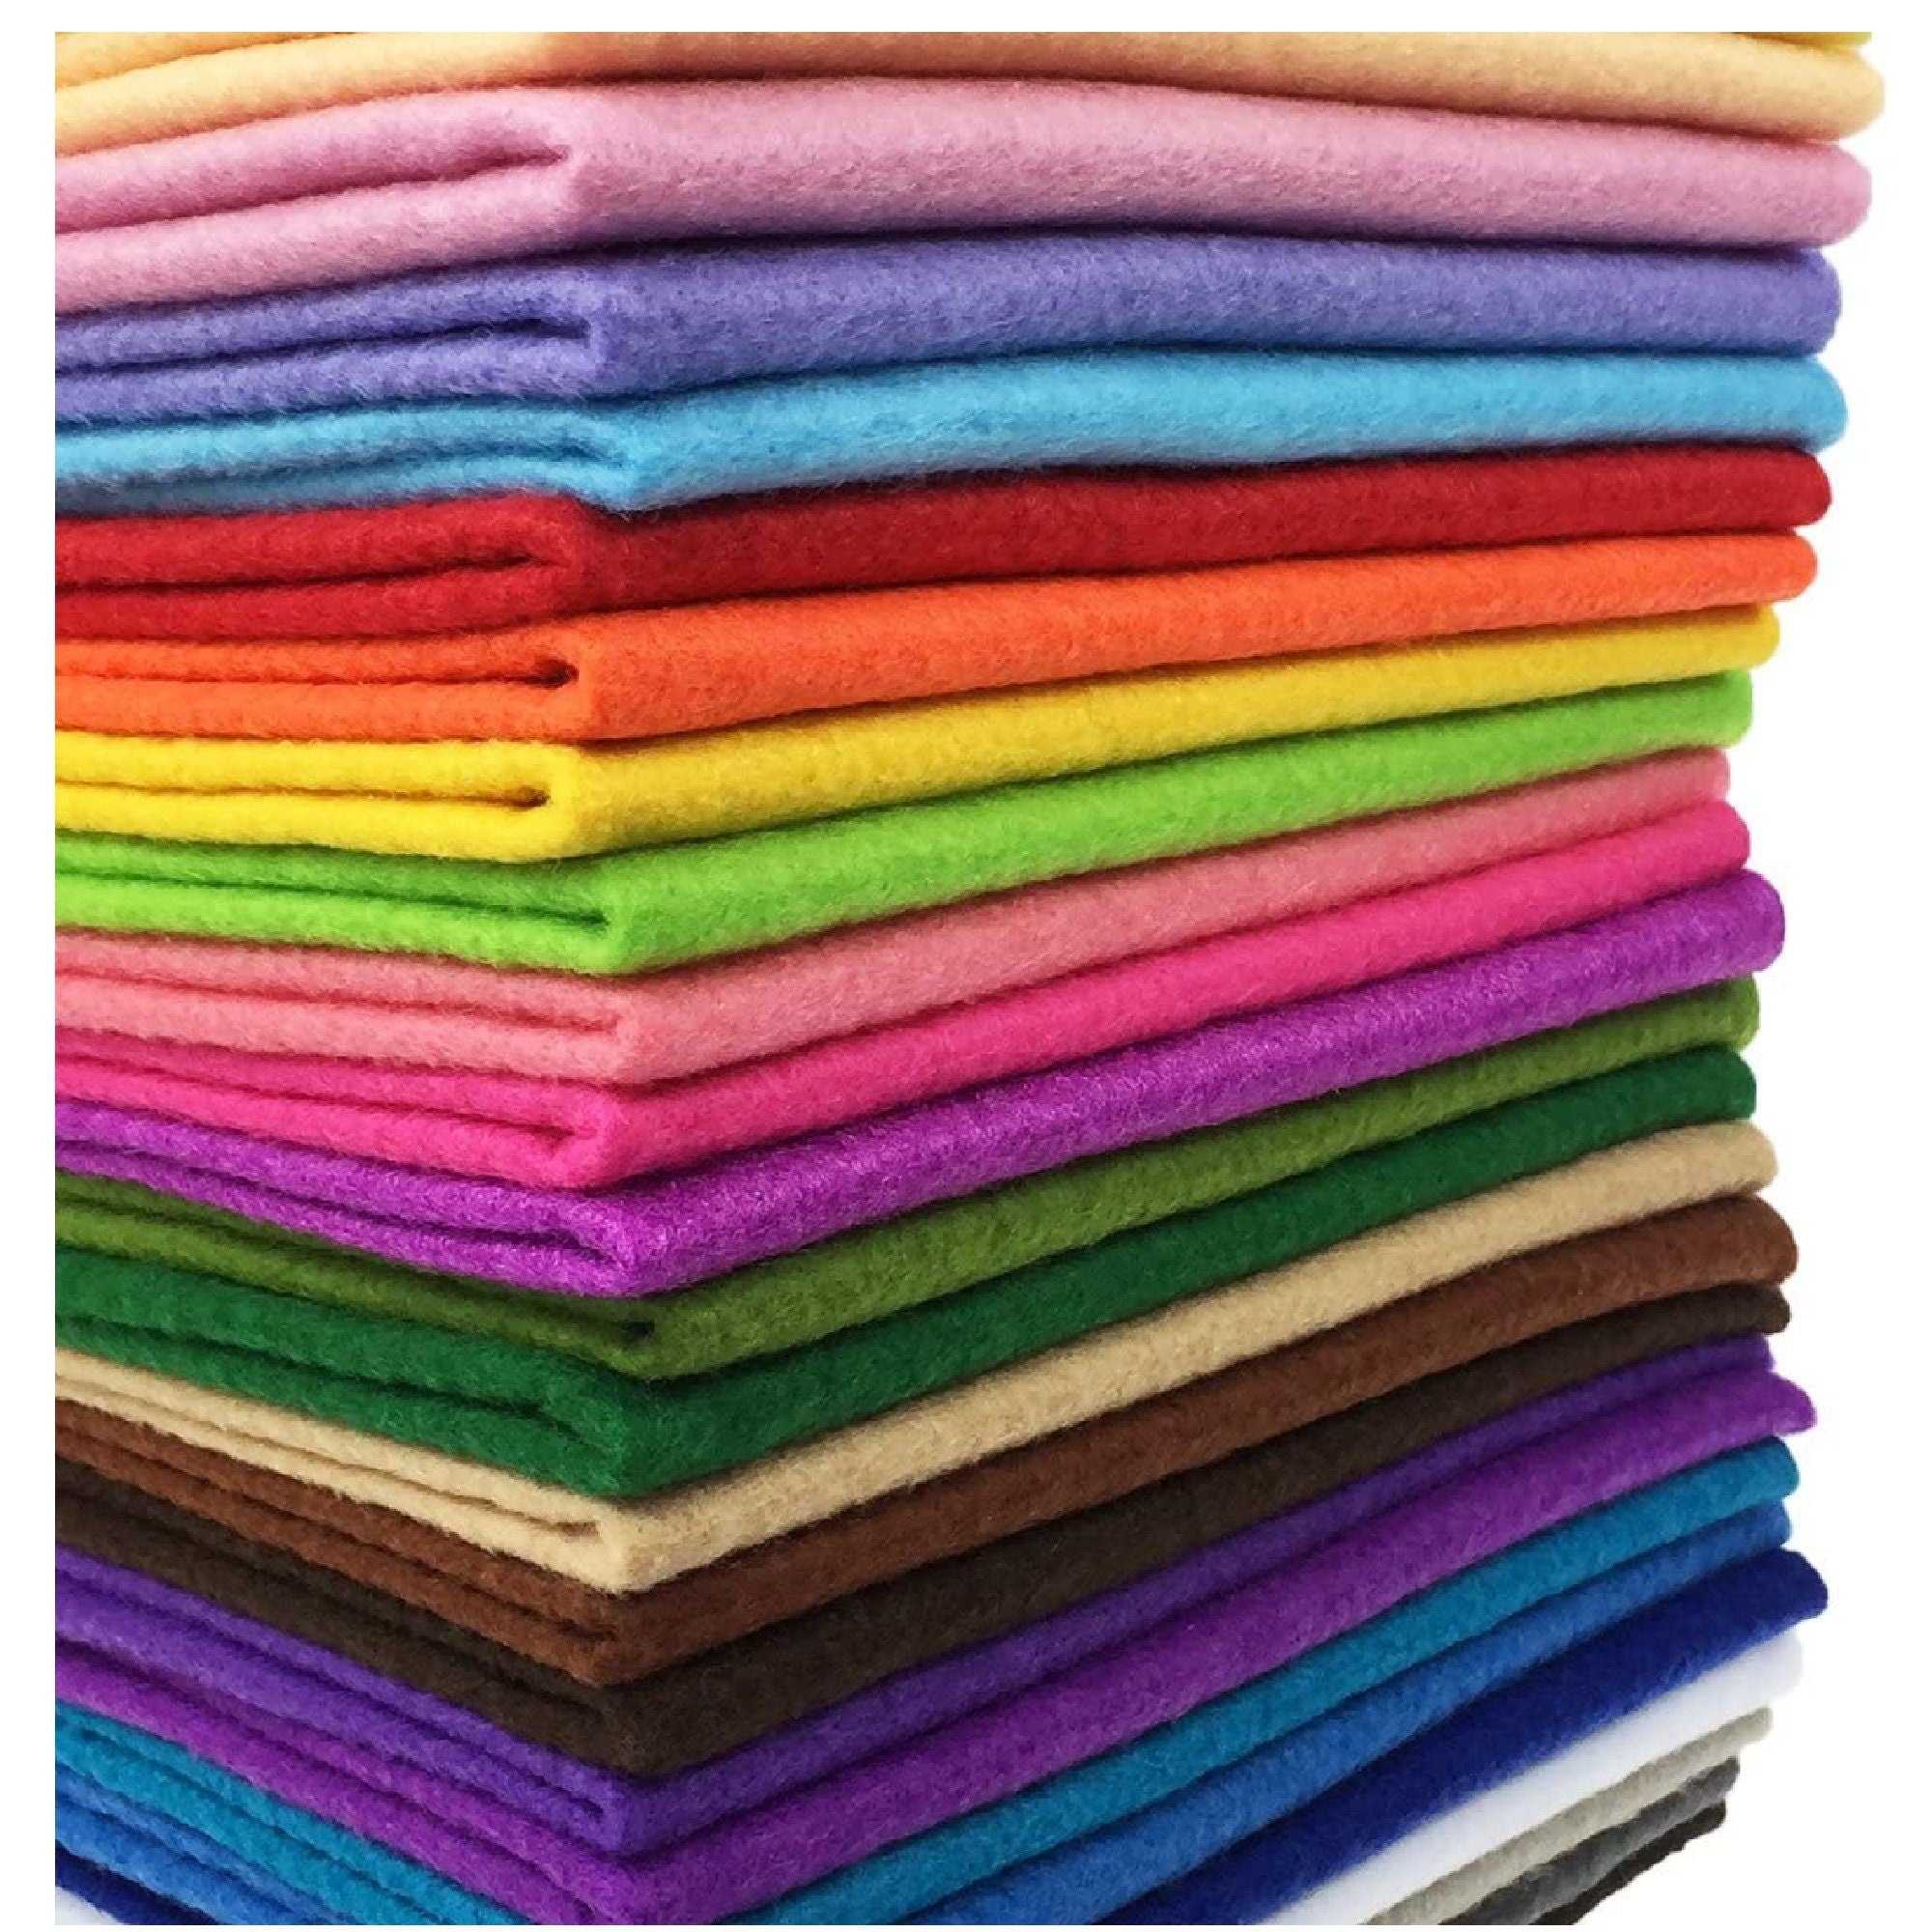 BUYGOO 60Pcs Stiff Felt Fabric Sheets, 12 x 12 inches Assorted Felt Sheets  Craft Felt Sheets 1mm Thick for DIY Crafts, Sewing, Crafting Projects